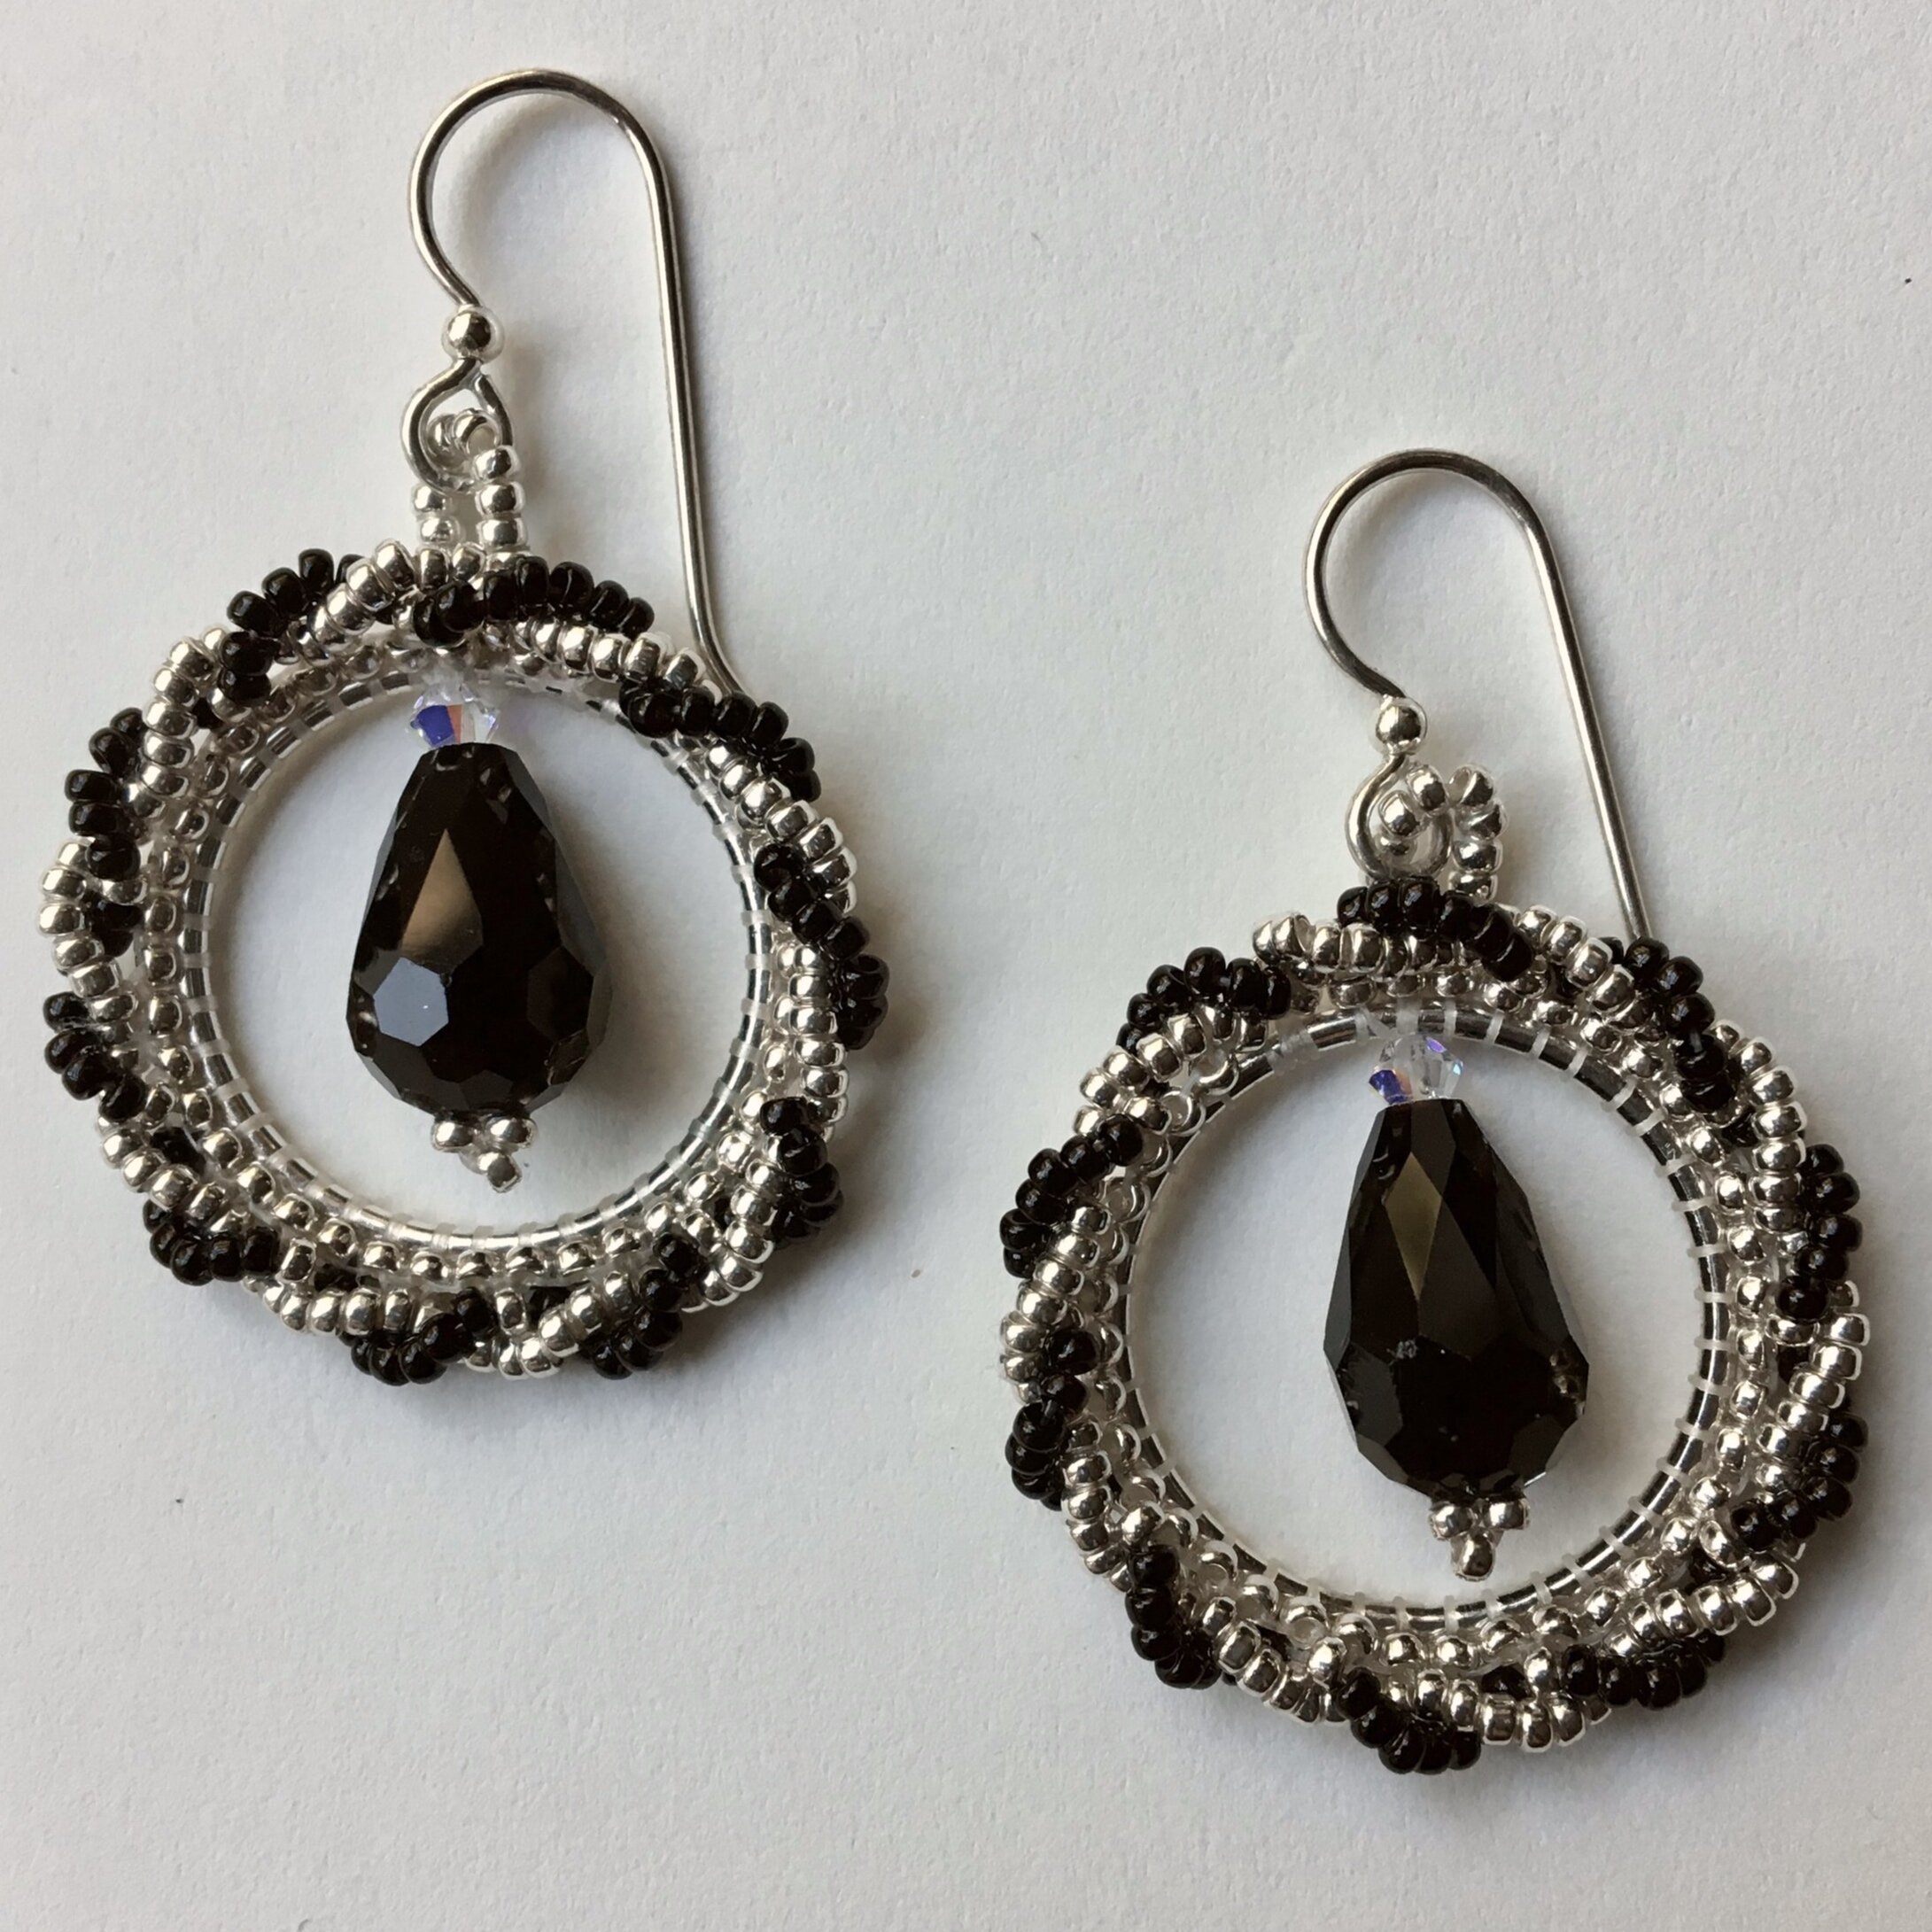 NEW! Twisted Silver and Black Hoops with Jet Crystal Drop Earrings